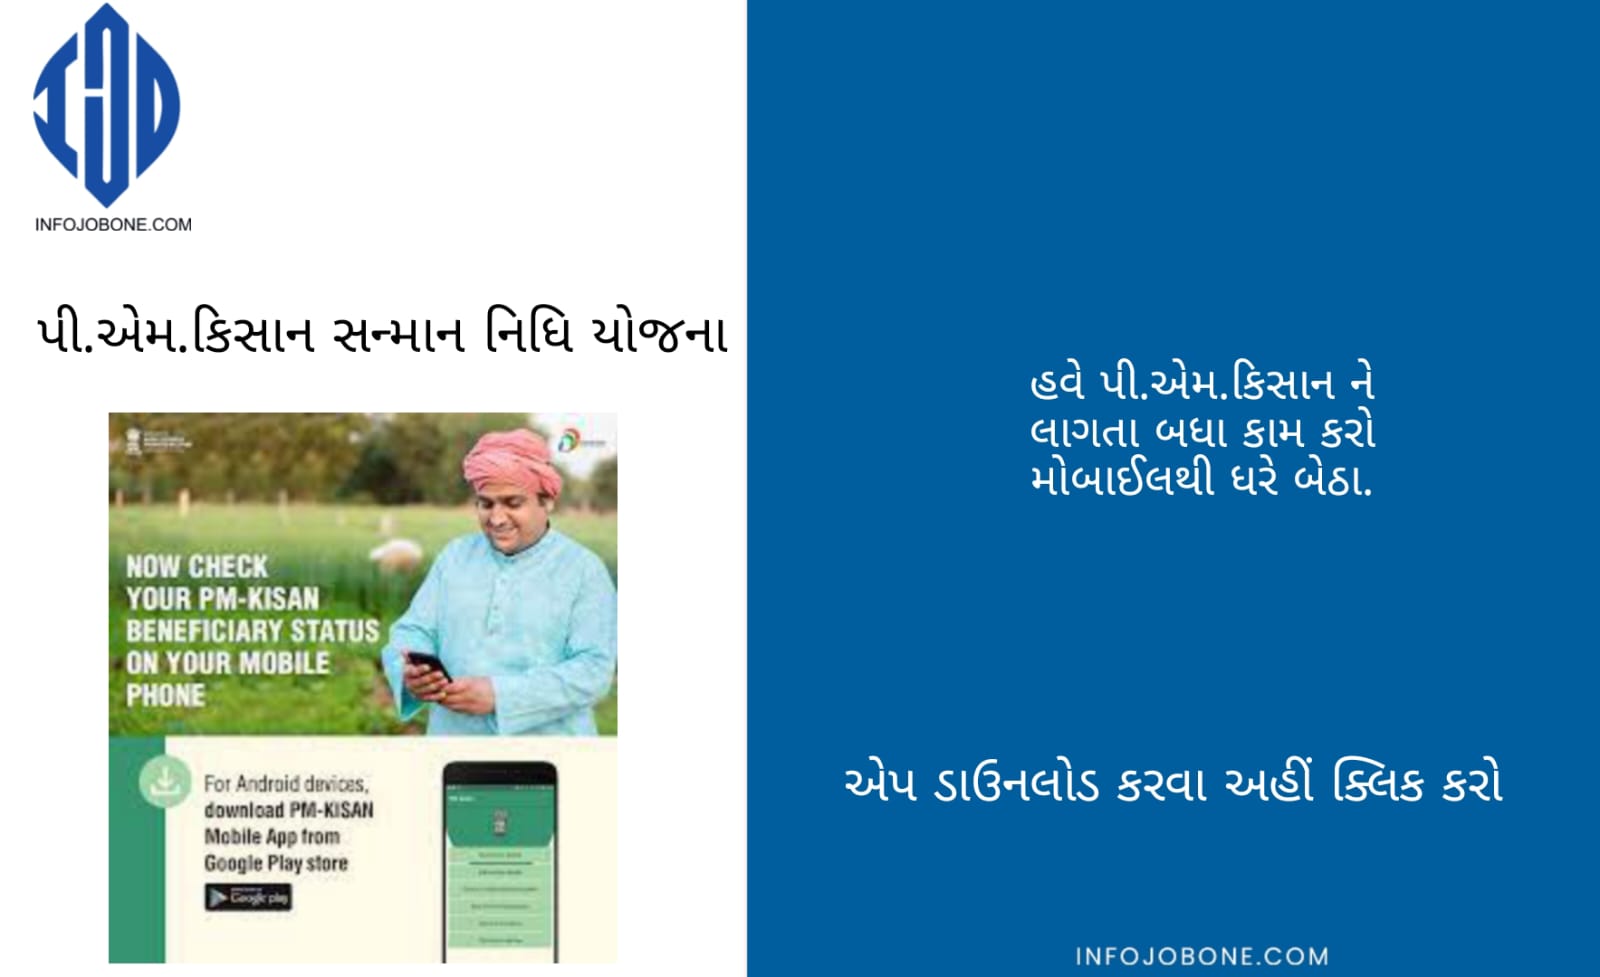 Download PMKISAN Android Mobile App